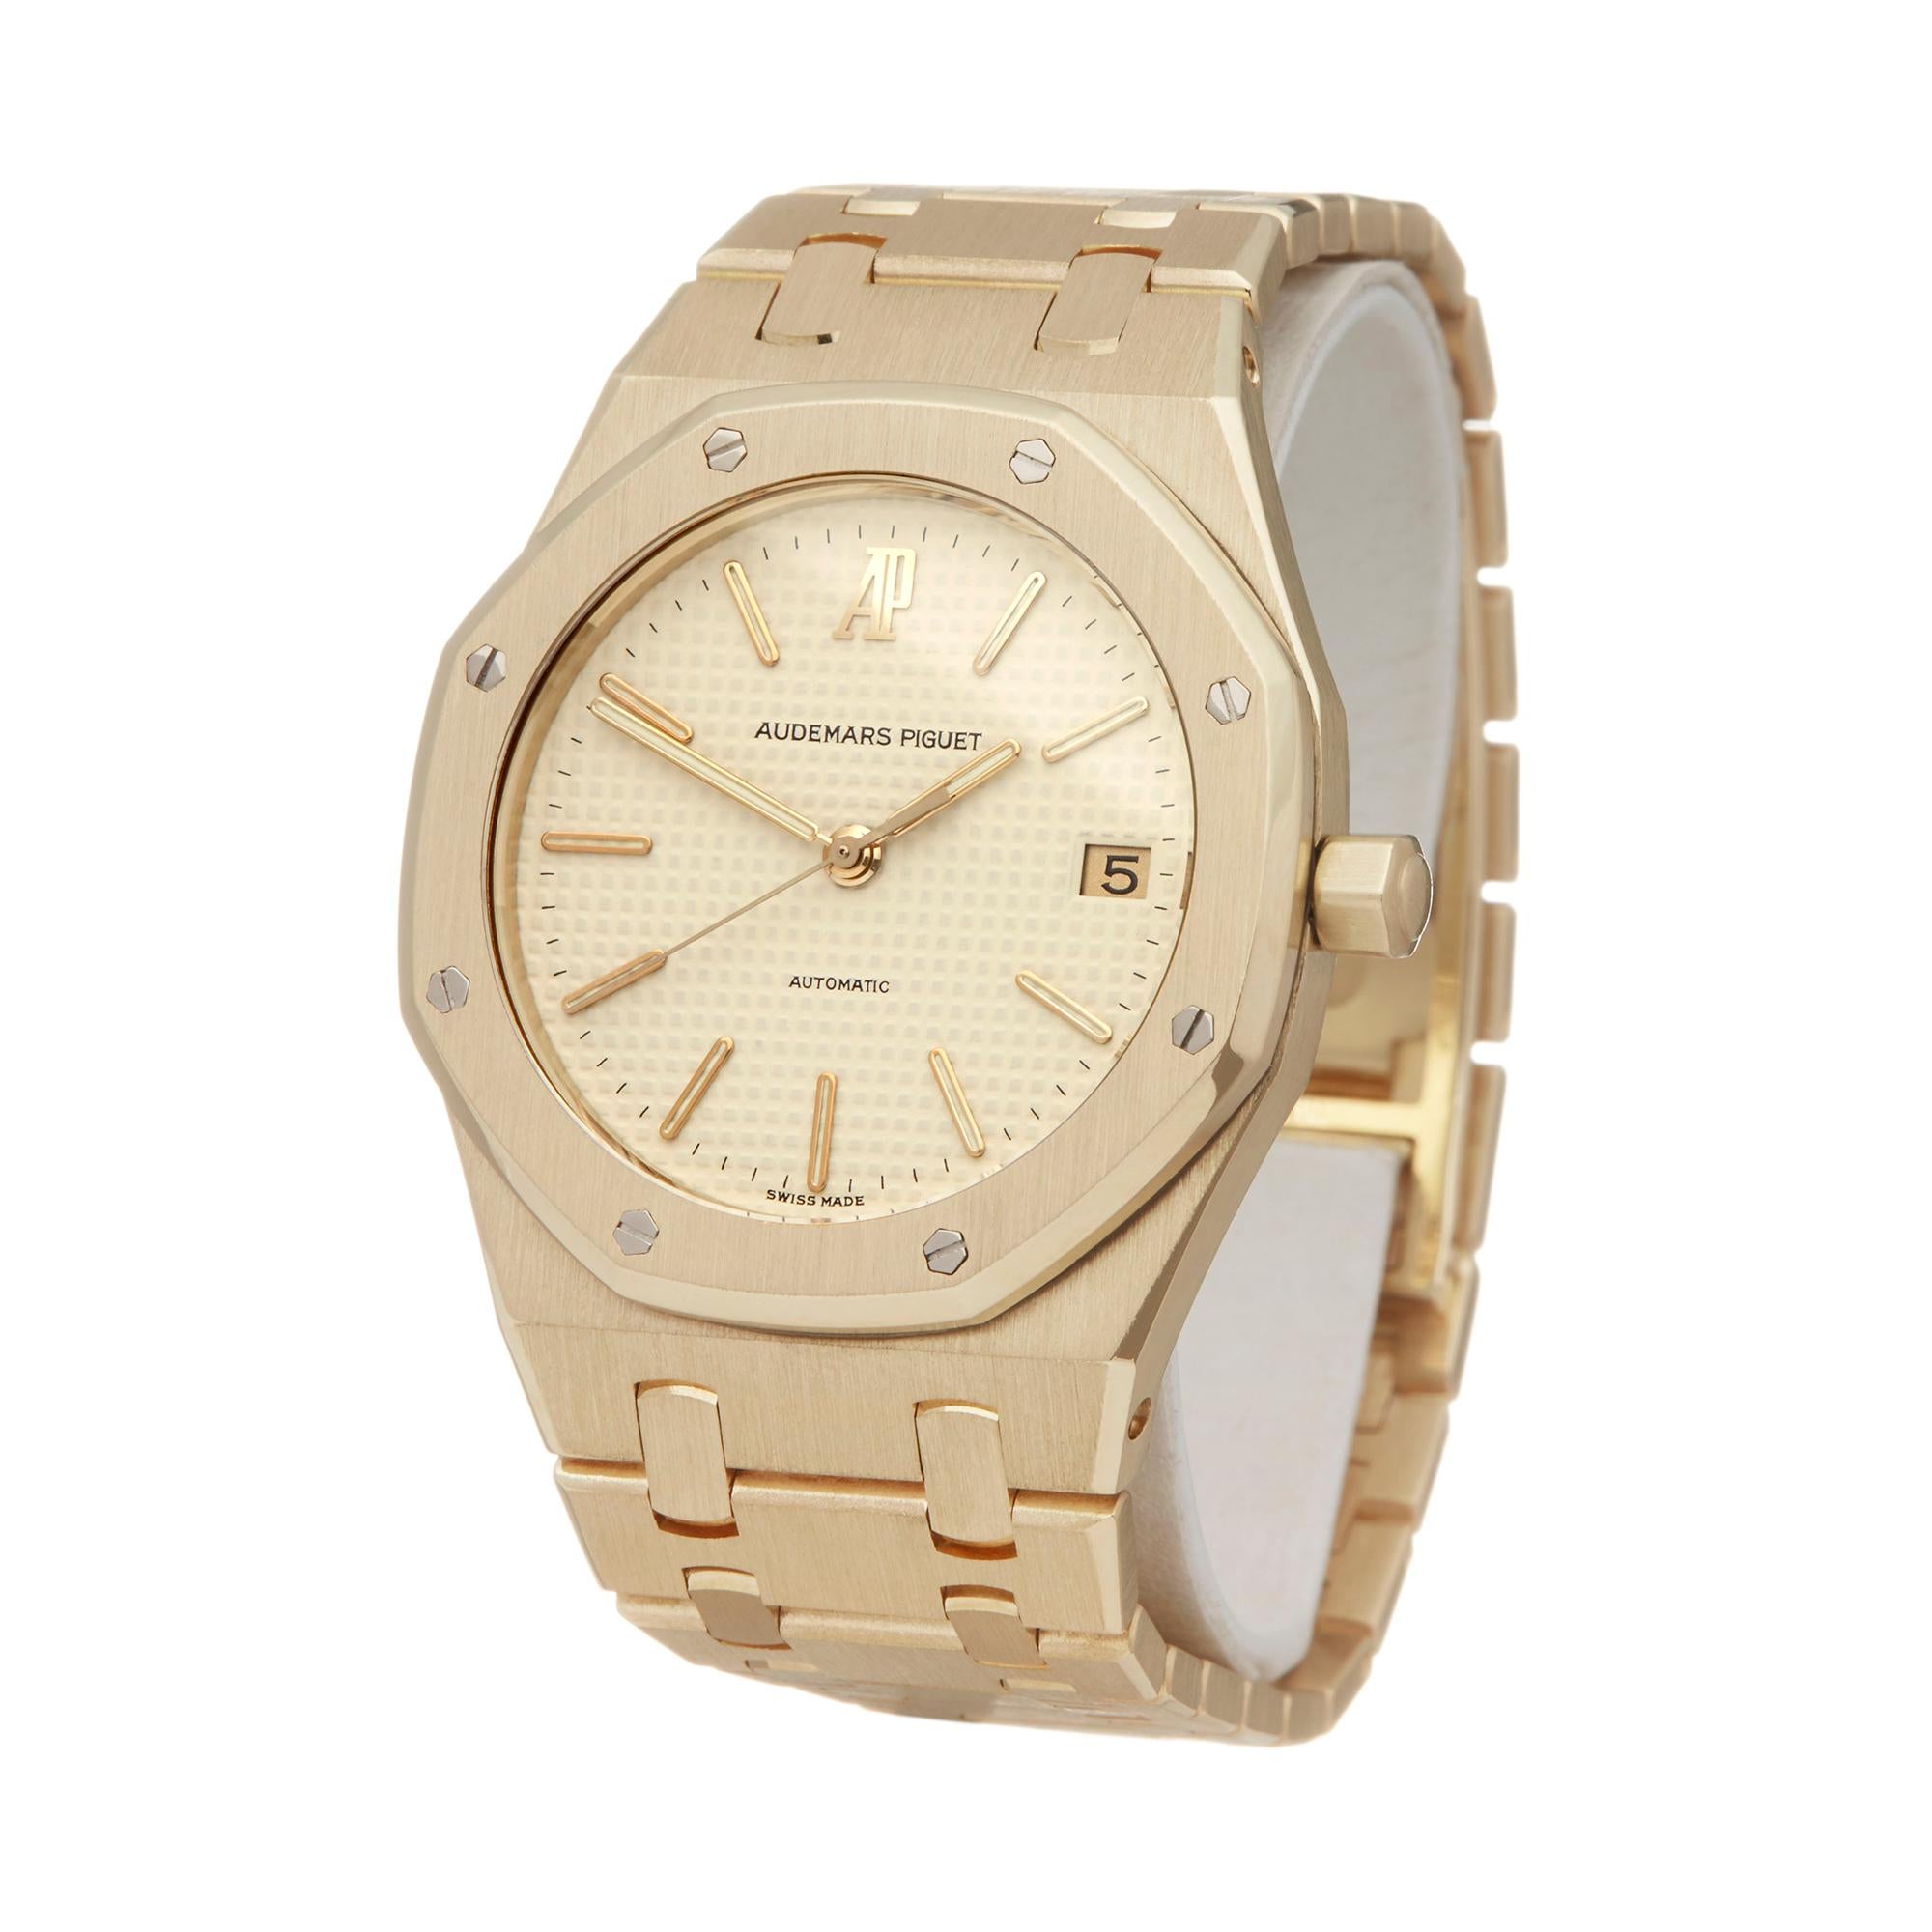 Ref: W5438
Manufacturer: Audemars Piguet
Model: Royal Oak
Model Ref: 14790
Age: Circa 1980's
Gender: Mens
Complete With: Box Only
Dial: Cream Baton
Glass: Sapphire Crystal
Movement: Automatic
Water Resistance: To Manufacturers Specifications
Case: